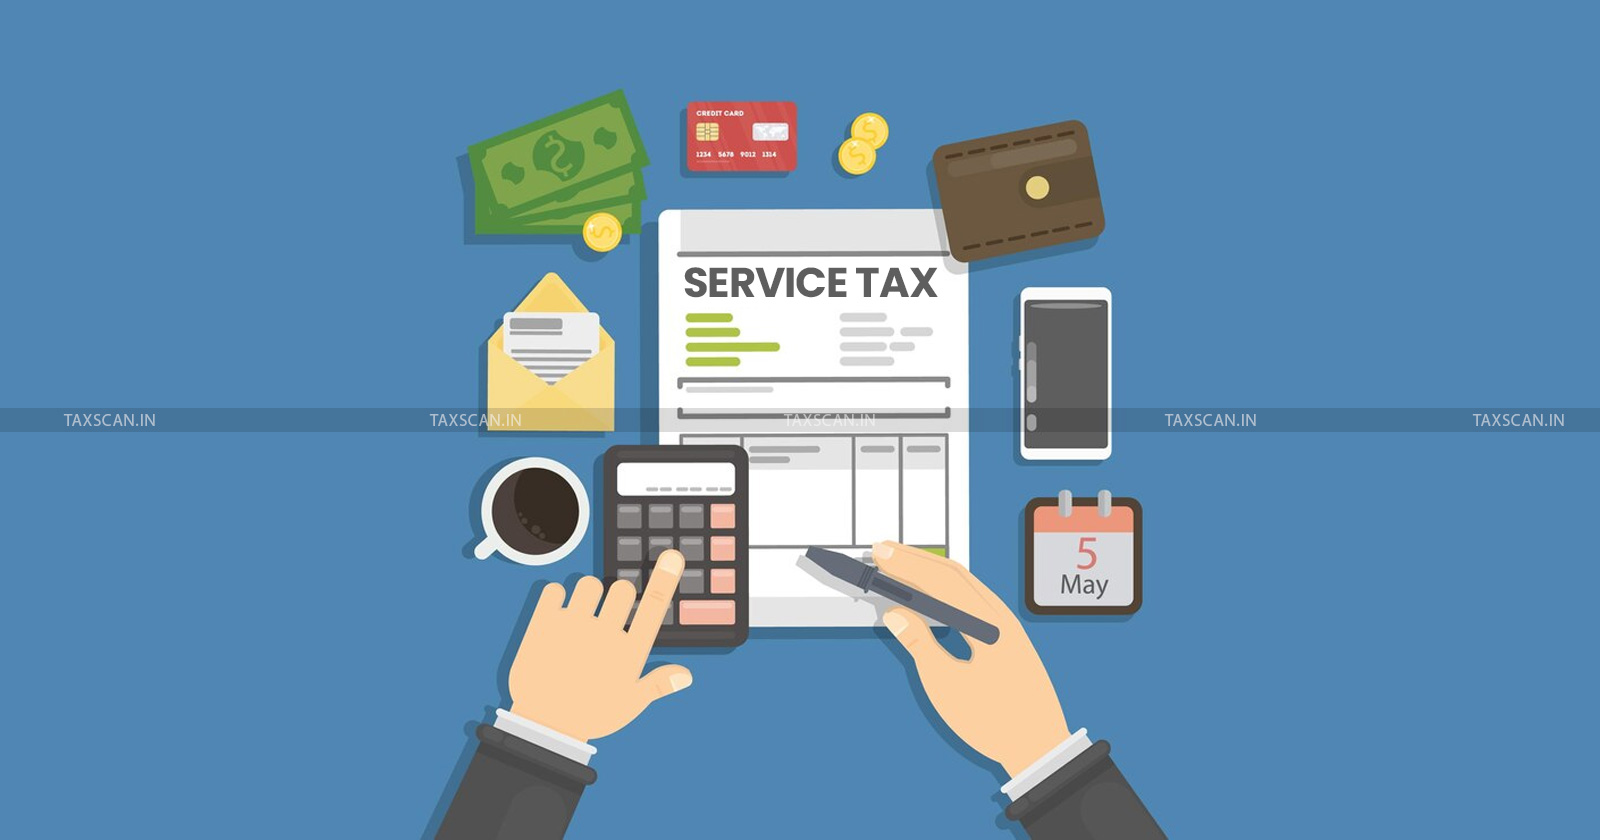 Service Tax for providing Corporate Guarantee leviable - commission received - CESTAT allows appeal - TAXSCAN